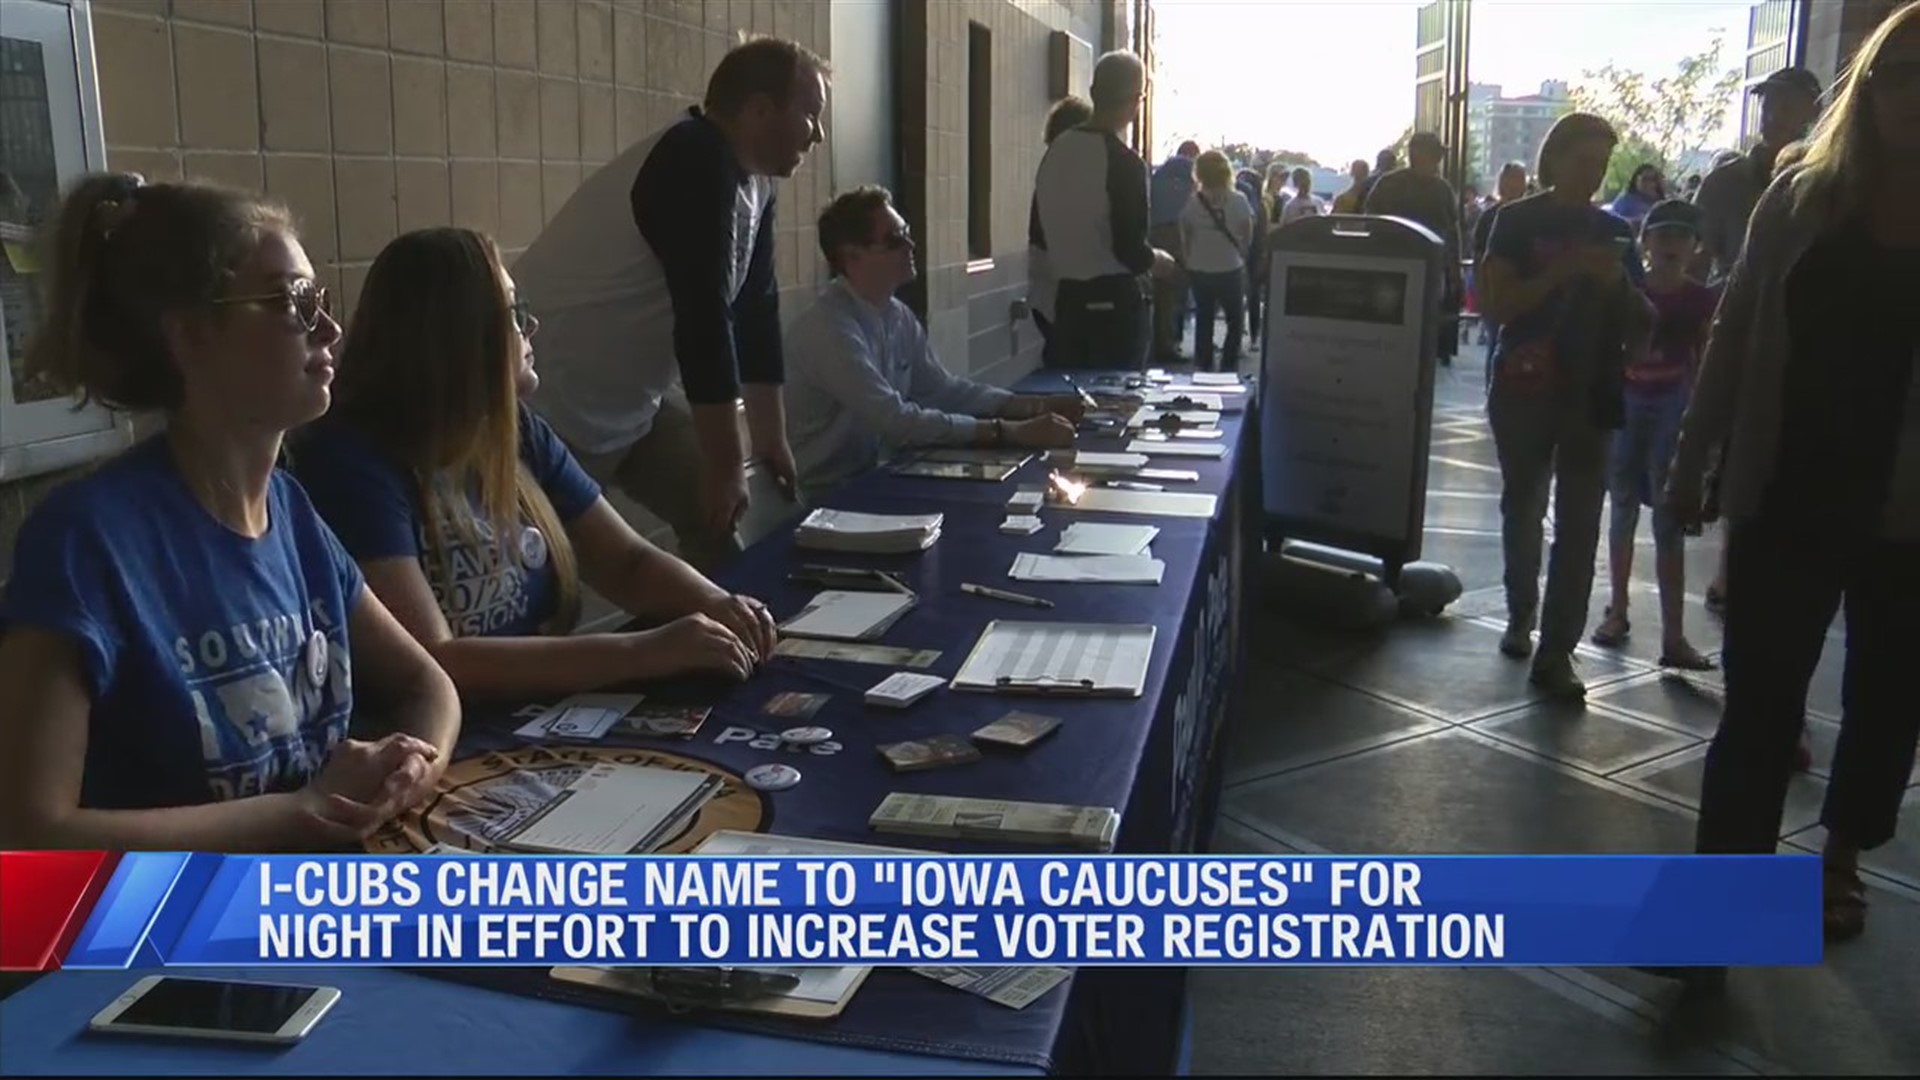 "Iowa Caucuses" play to get people excited about the caucuses